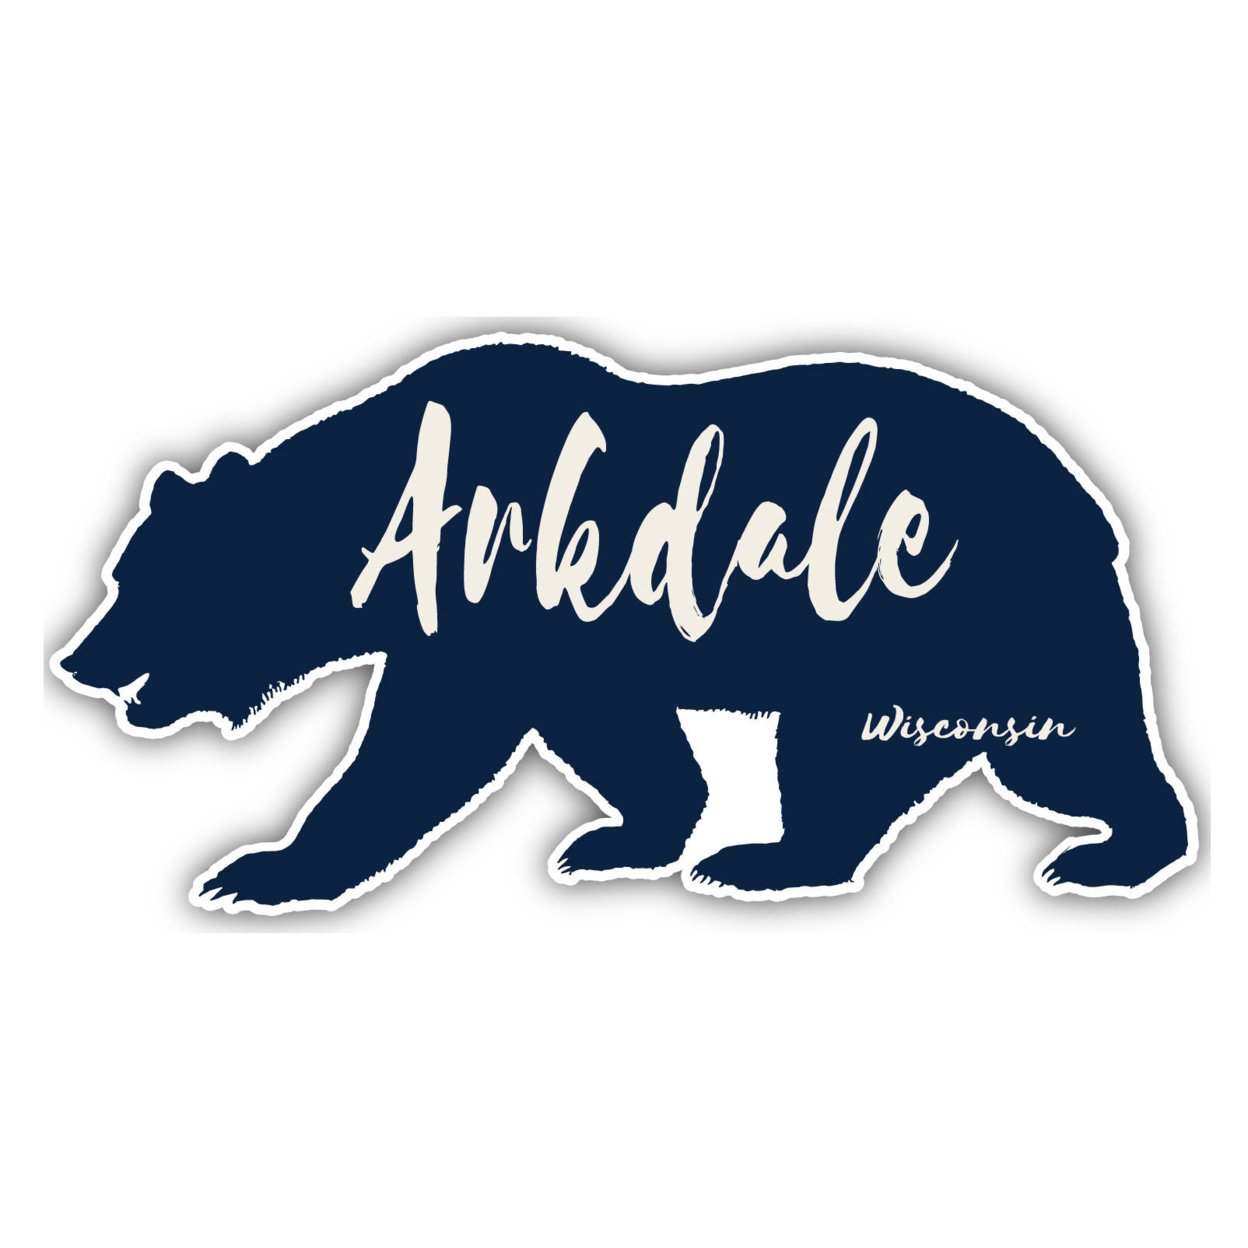 Arkdale Wisconsin Souvenir Decorative Stickers (Choose Theme And Size) - 4-Pack, 4-Inch, Bear